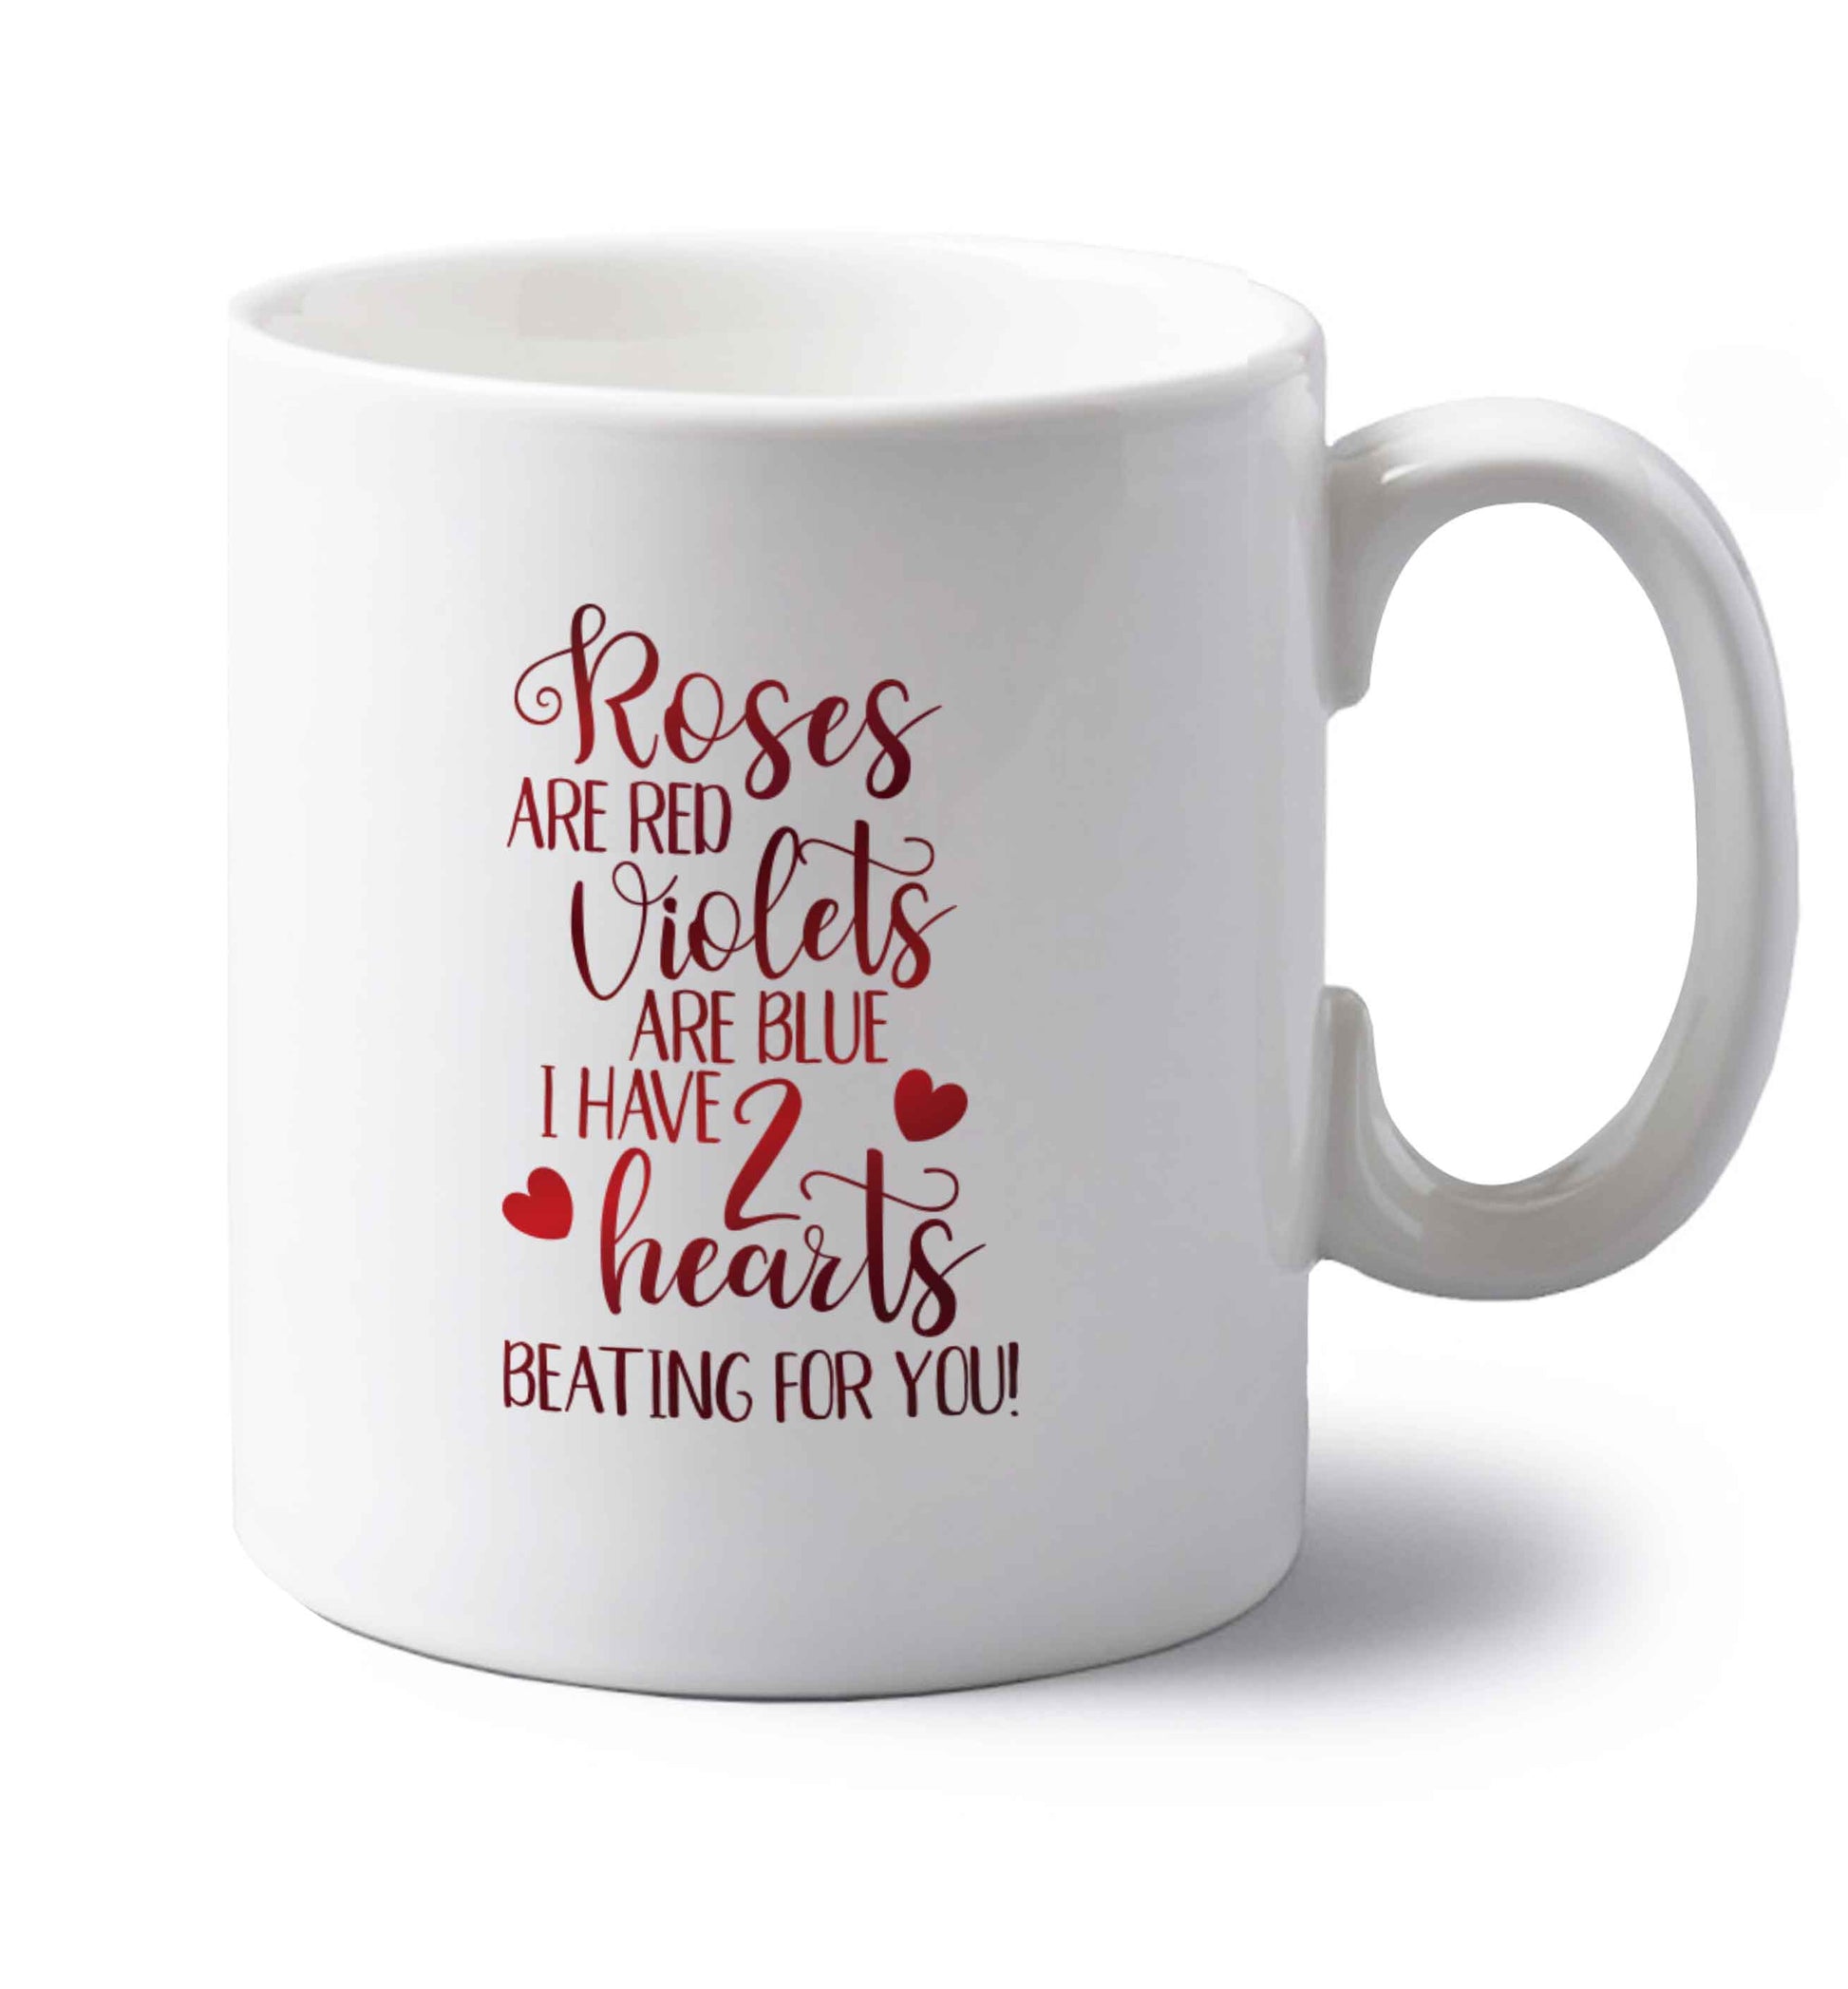 Roses are red violets are blue I have two hearts beating for you left handed white ceramic mug 